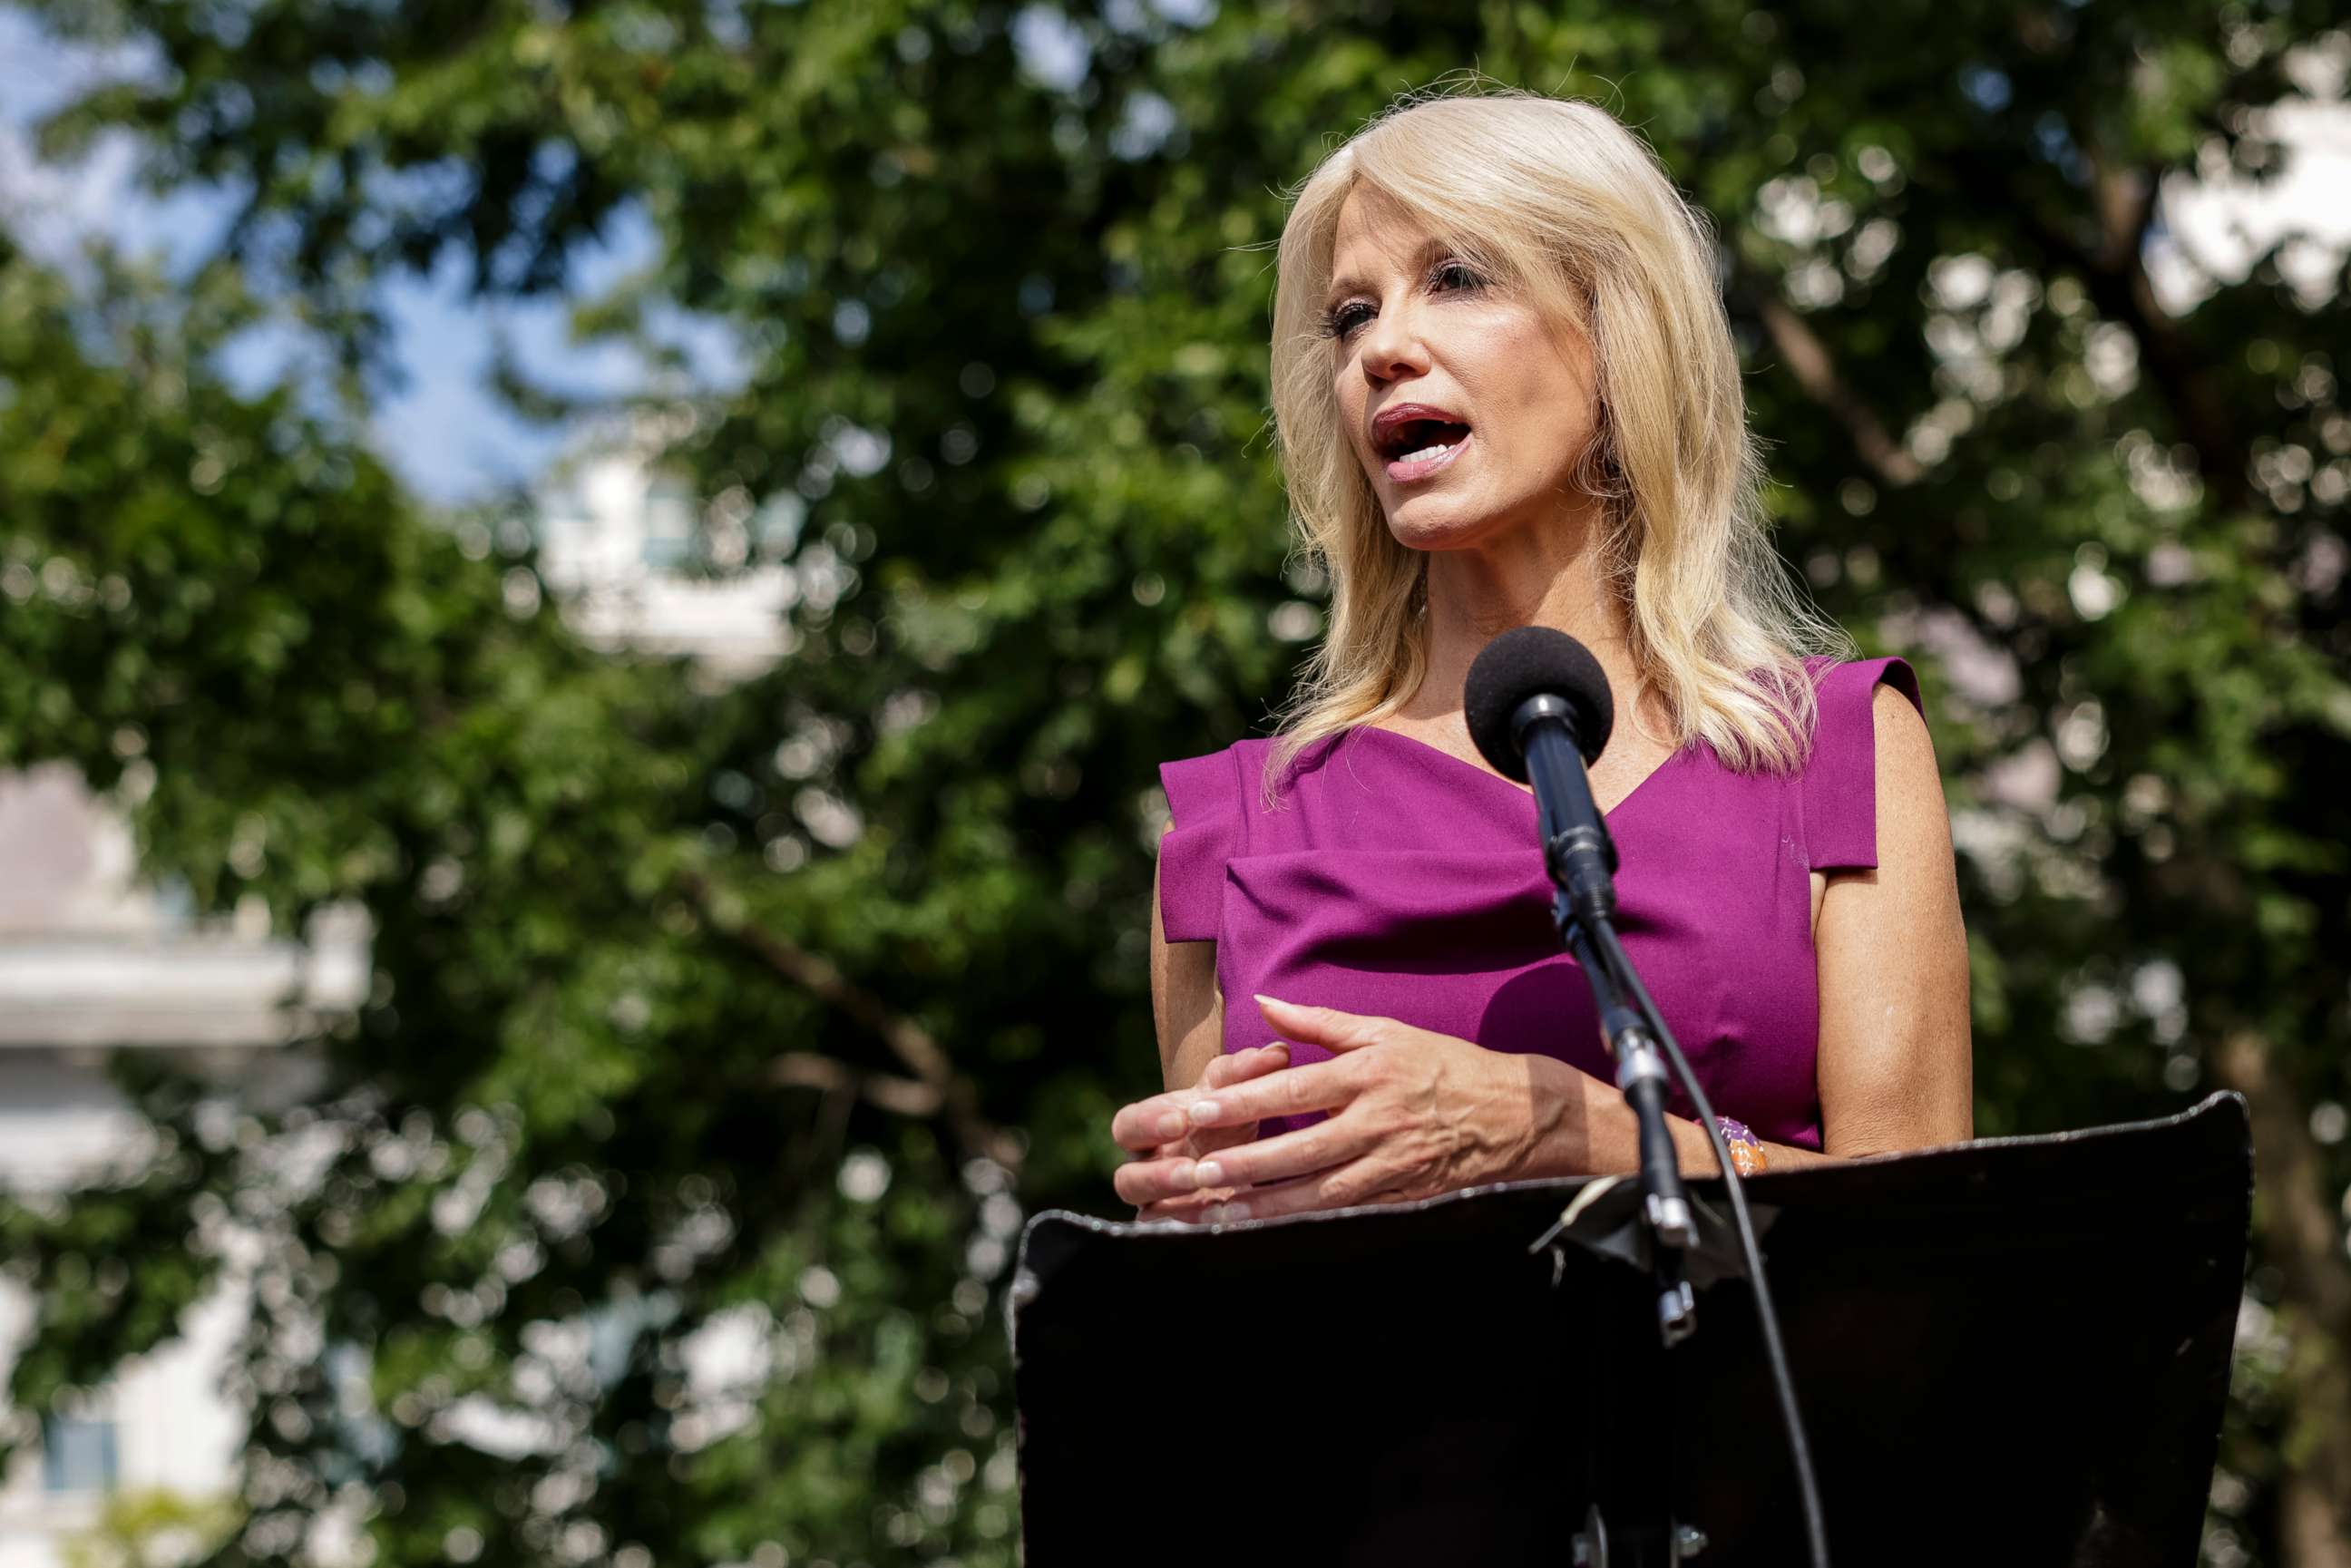 PHOTO: Kellyanne Conway, counselor to President Donald Trump, speaks to reporters outside of the West Wing of the White House on August 6, 2020 in Washington, DC.